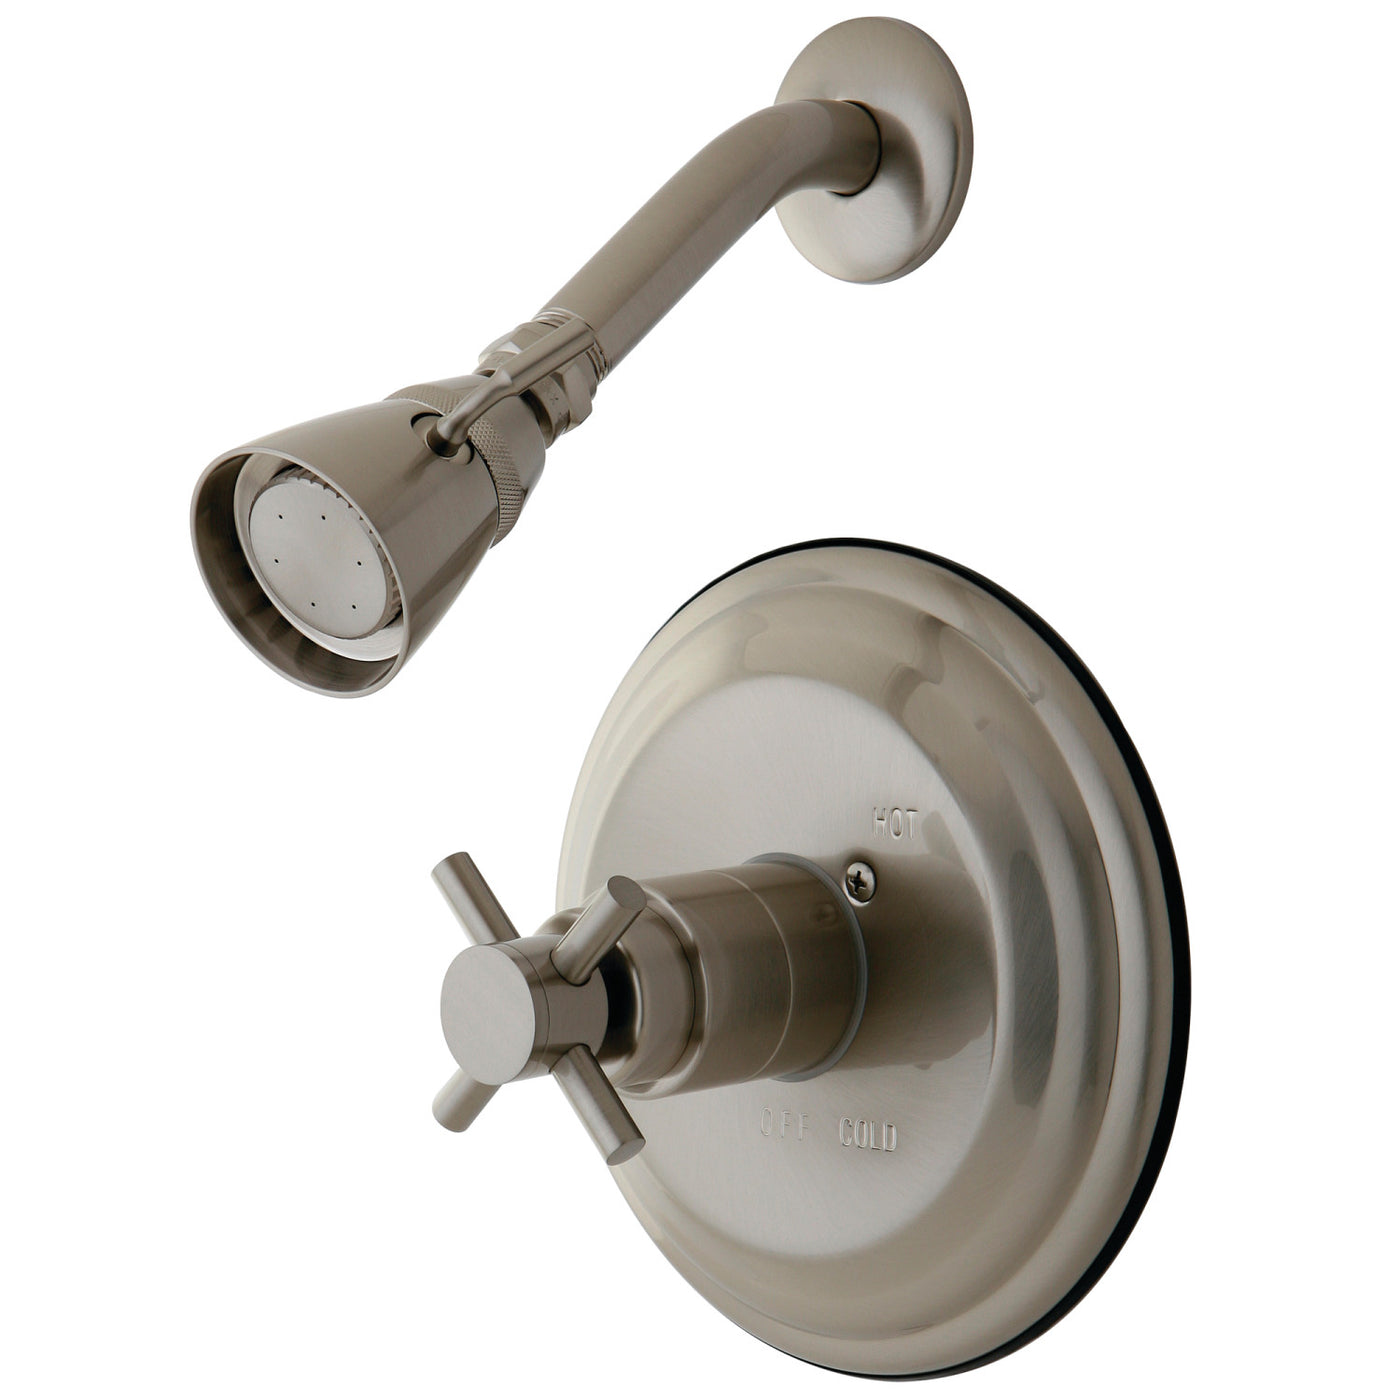 Elements of Design EB2638DXSO Shower Faucet, Brushed Nickel